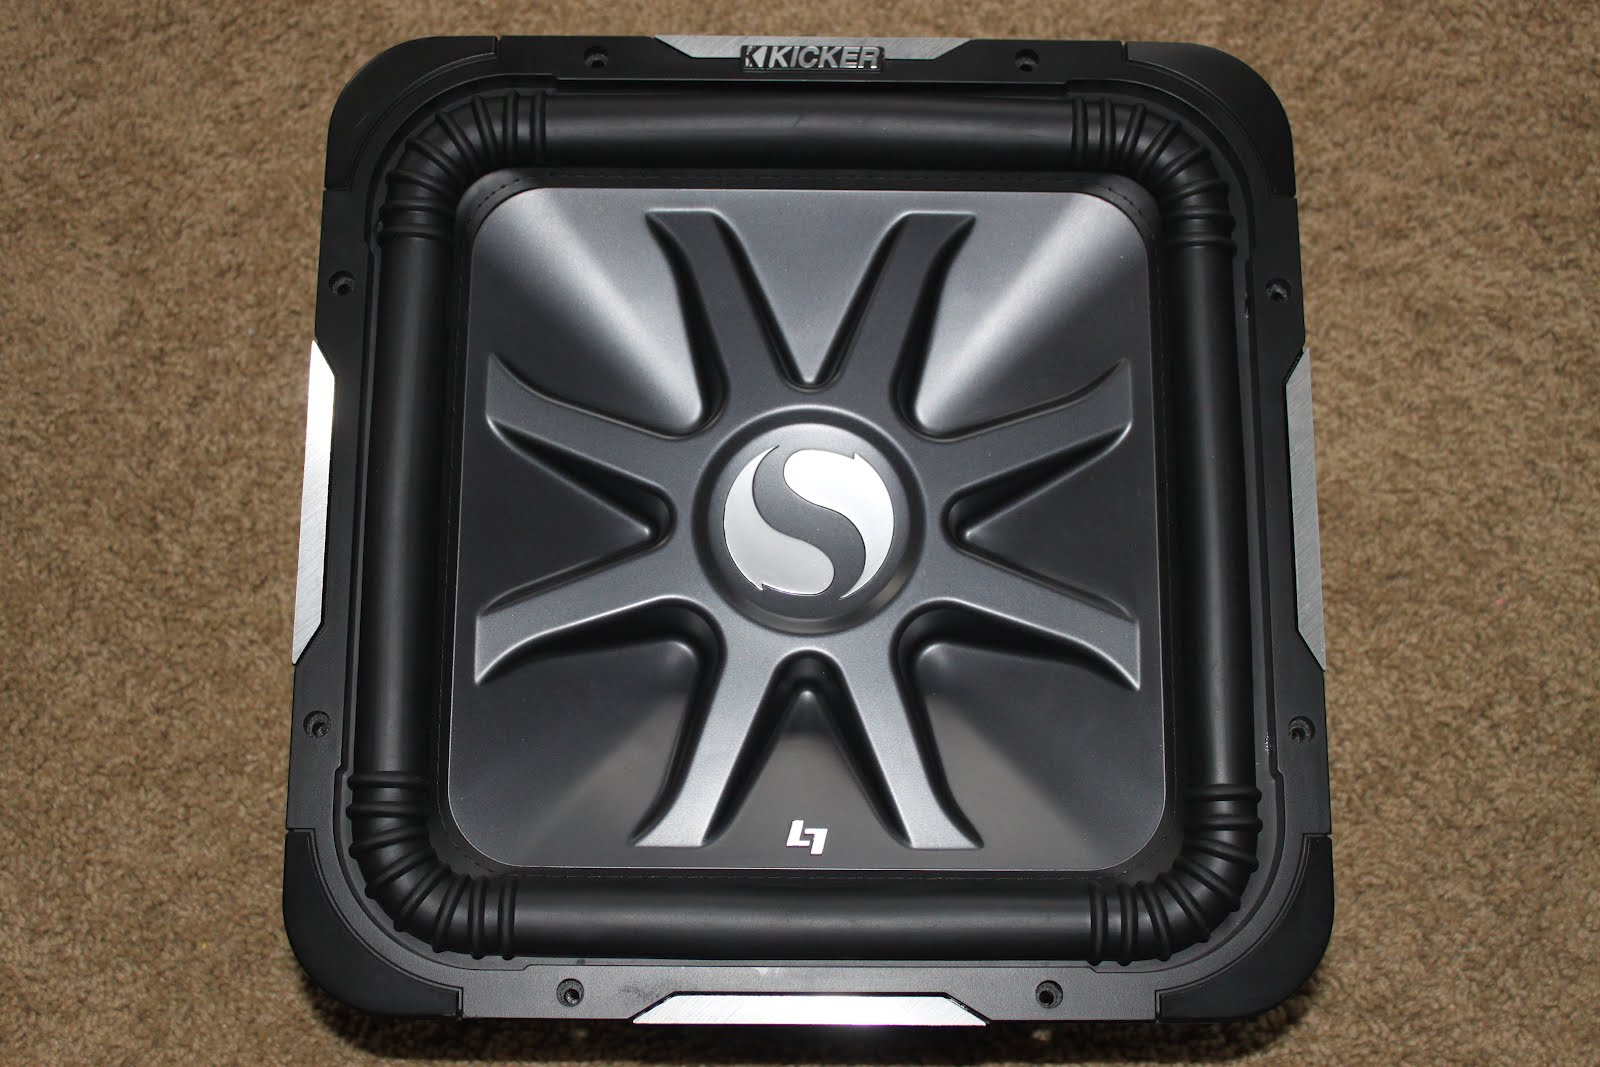 Stereowise Plus: Kicker Solo-Baric L7 15 Inch Subwoofer Review